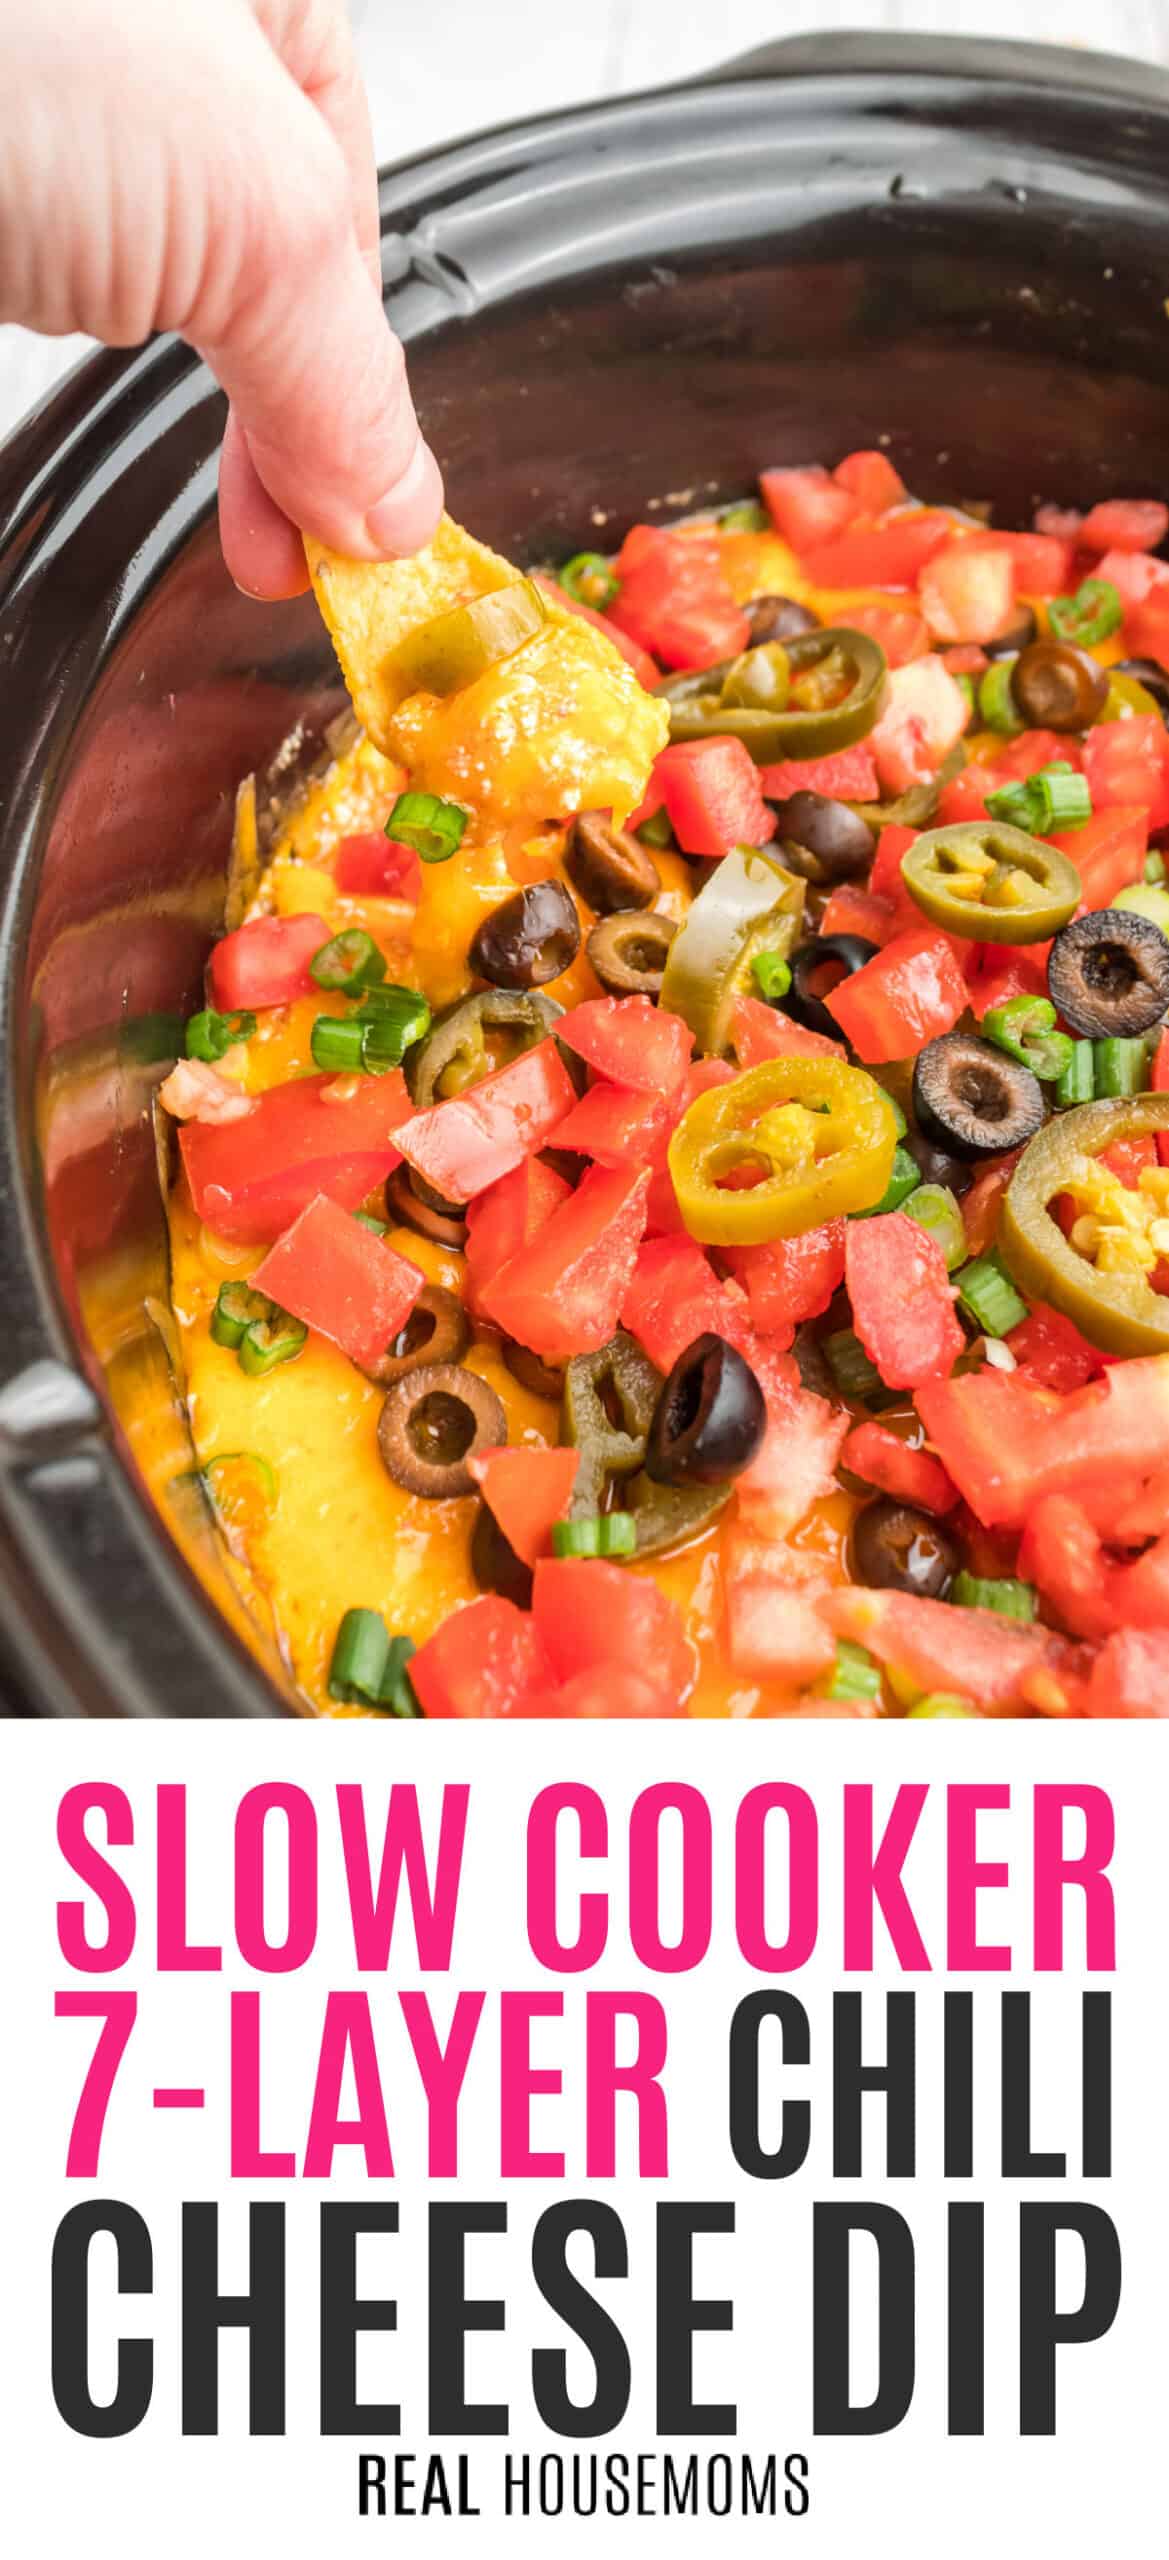 Best Slow Cooker Chili - The Magical Slow Cooker